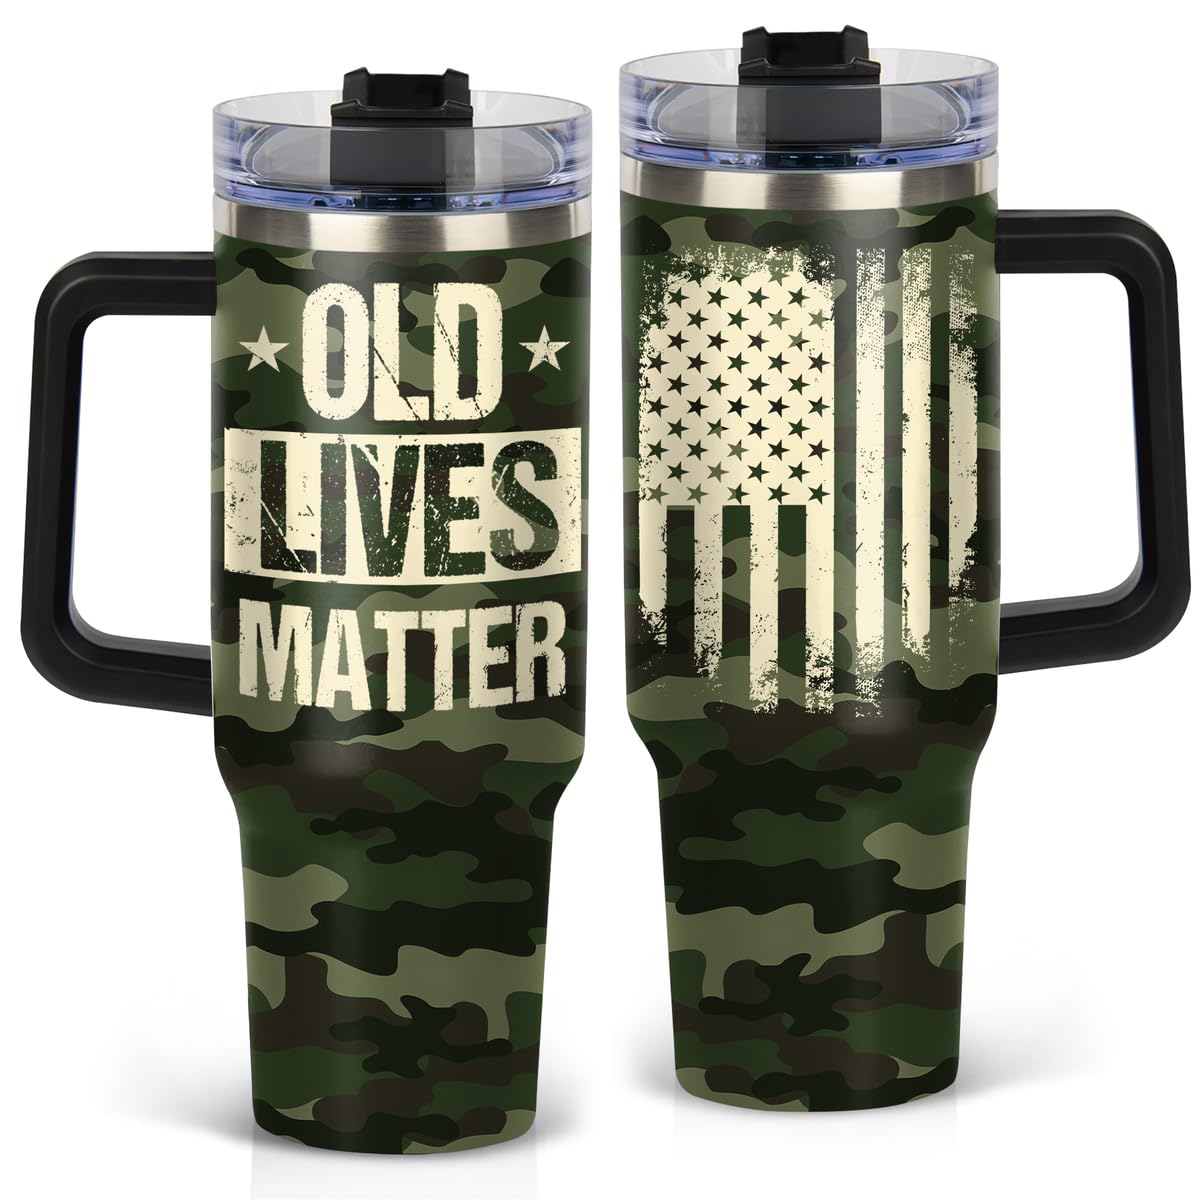 Limima Gifts for Old Men, Old Lives Matter 40 oz Tumbler, Birthday - Retirement - Christmas Gift for Old People, Gift for Grandpa - Him - Dad - Husband,60th - 70th - 80th - 90th Birthday Old Man Gift